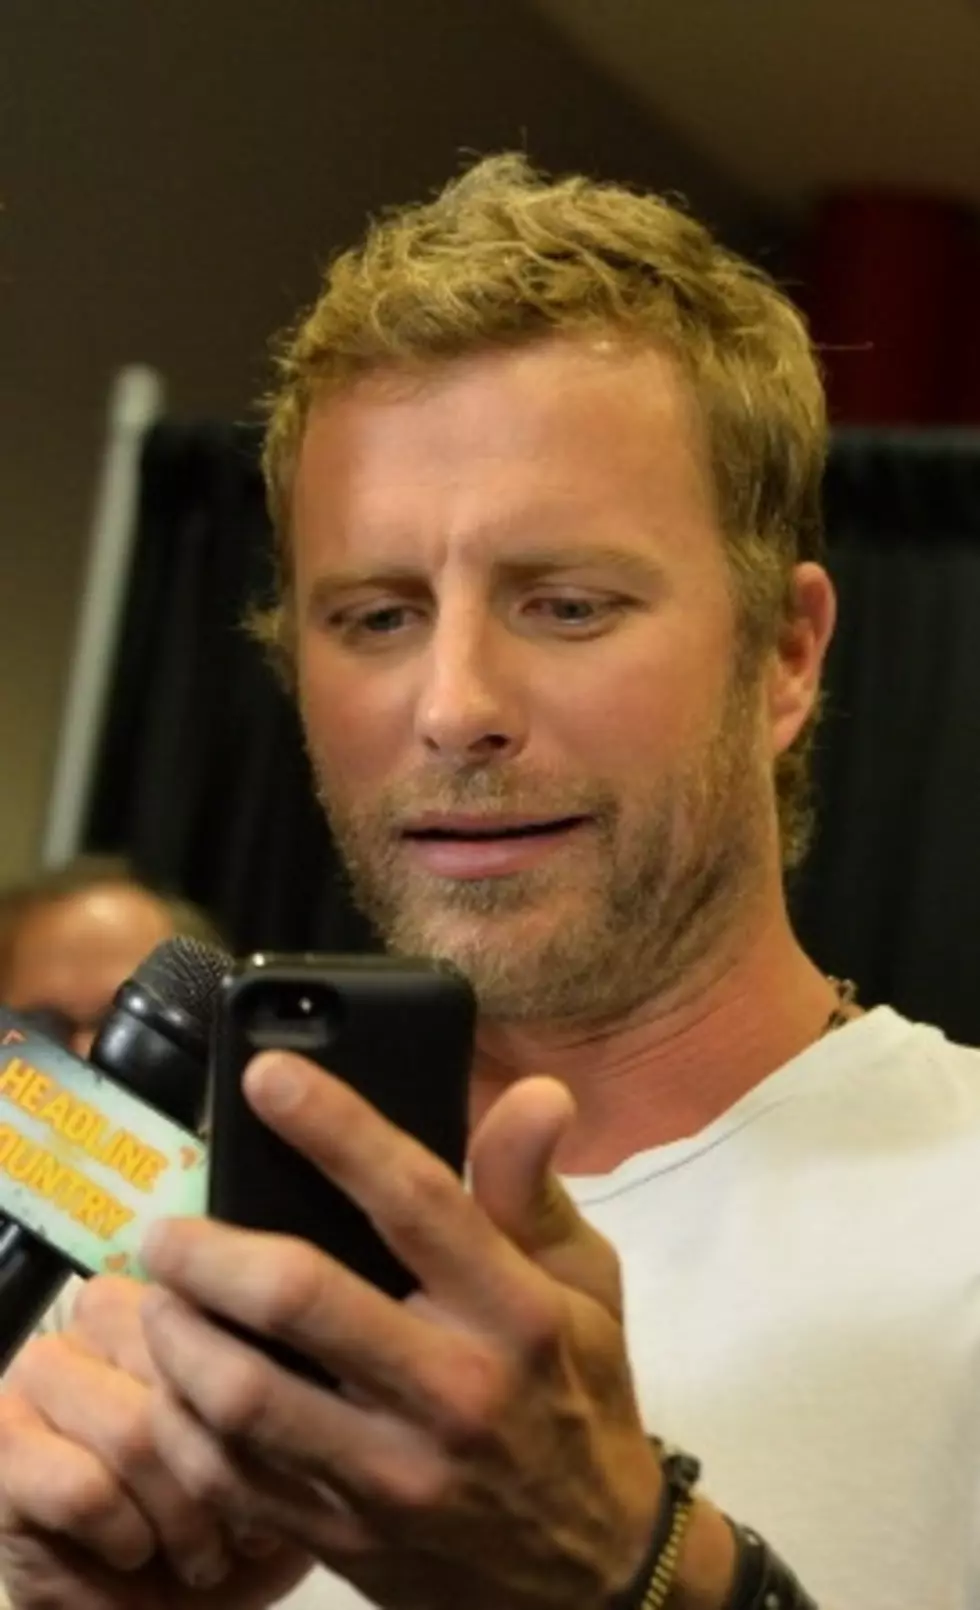 Dierks Bentley Has Mail, Tons and Tons of Mail After Accidentally Posting His Email Address Online